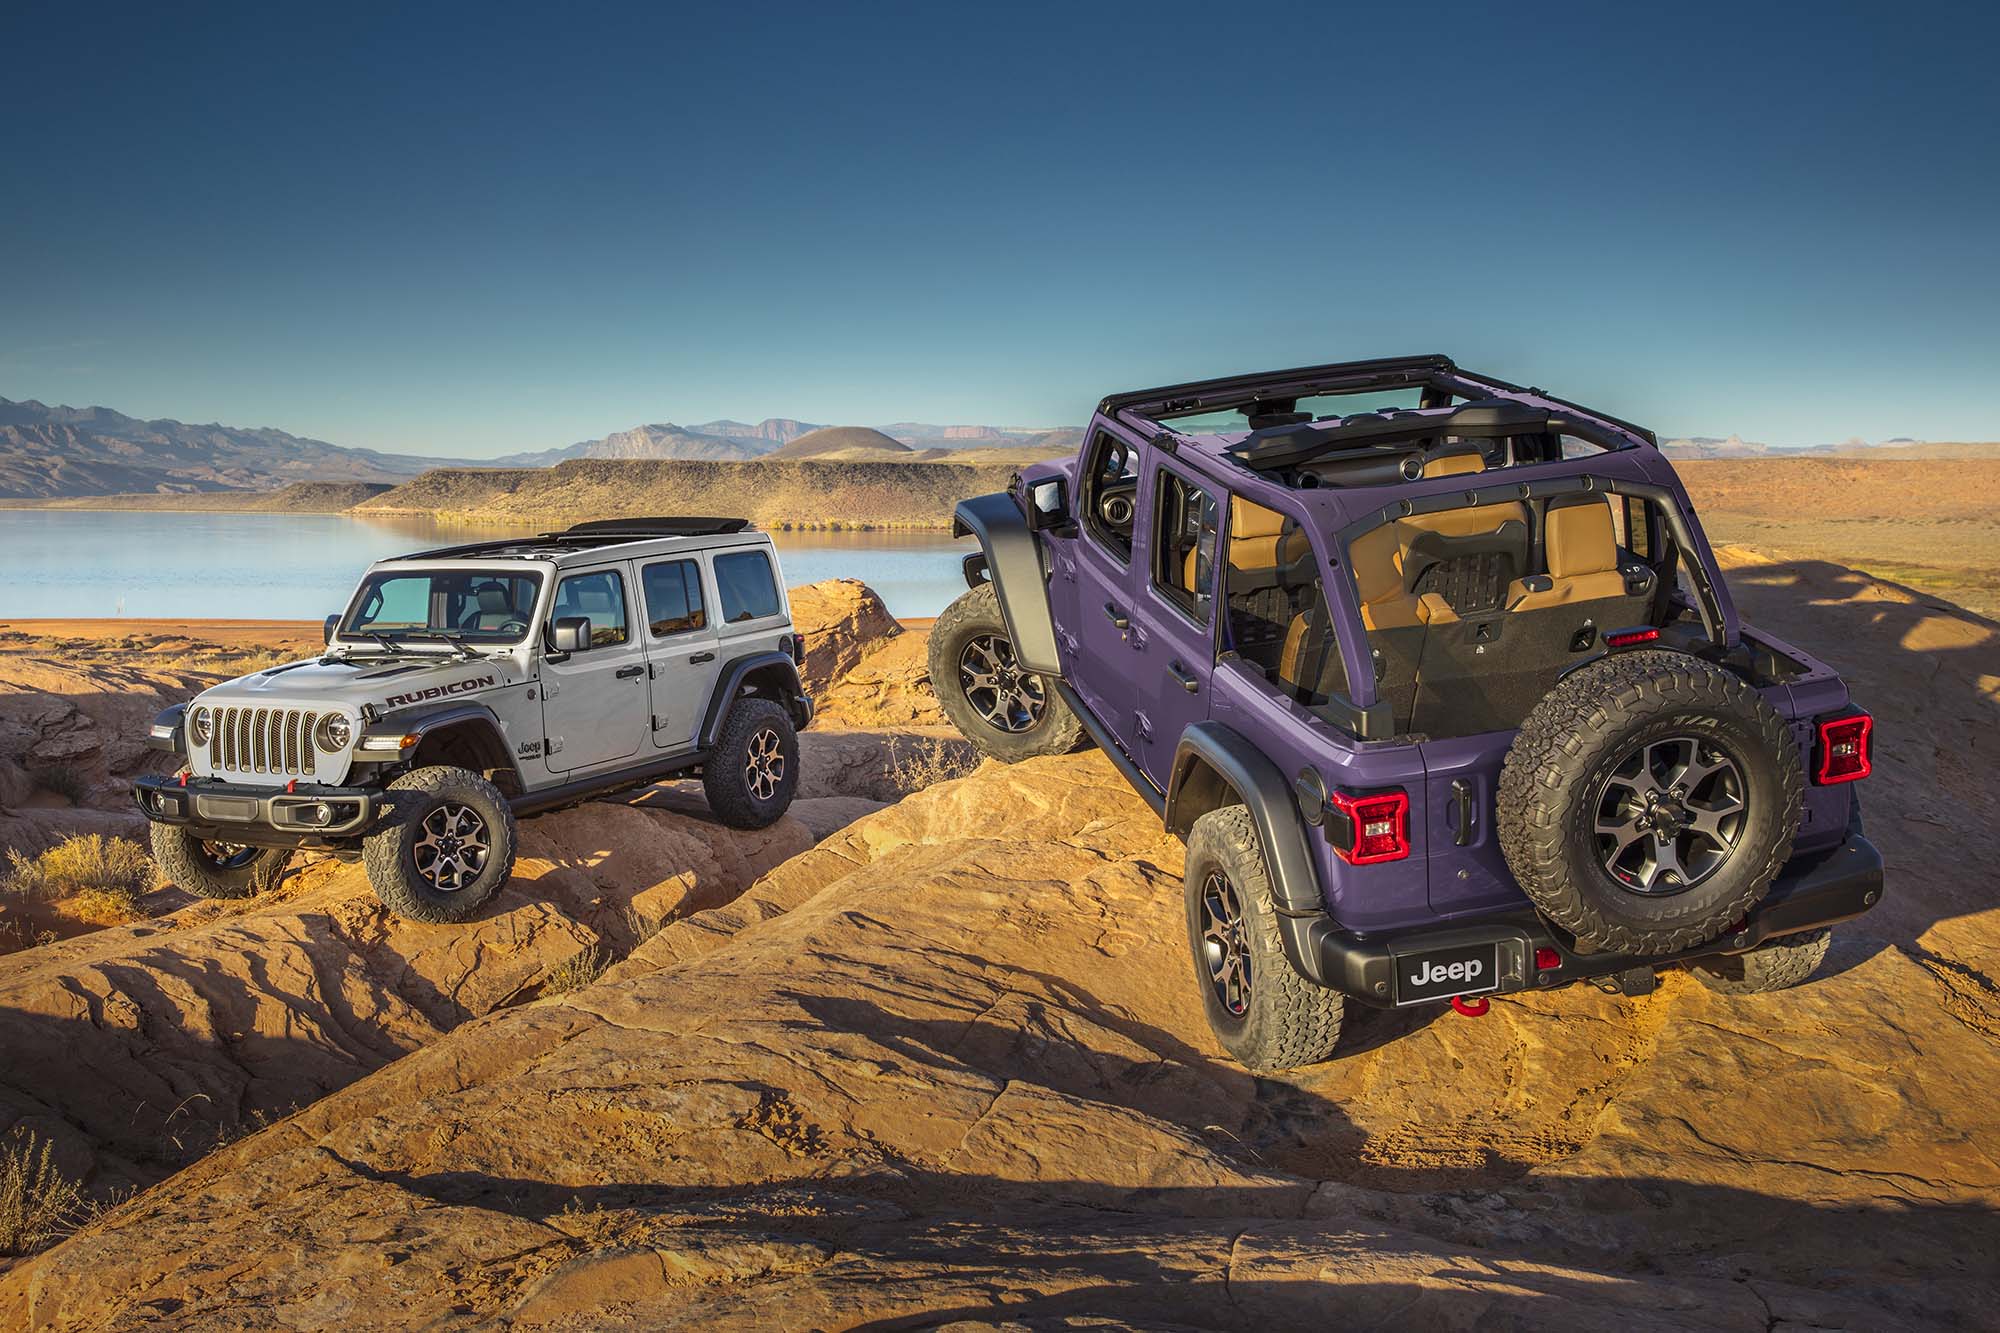 A gray Jeep Wrangler and purple Jeep Wrangler parked on rocks in front of a lake